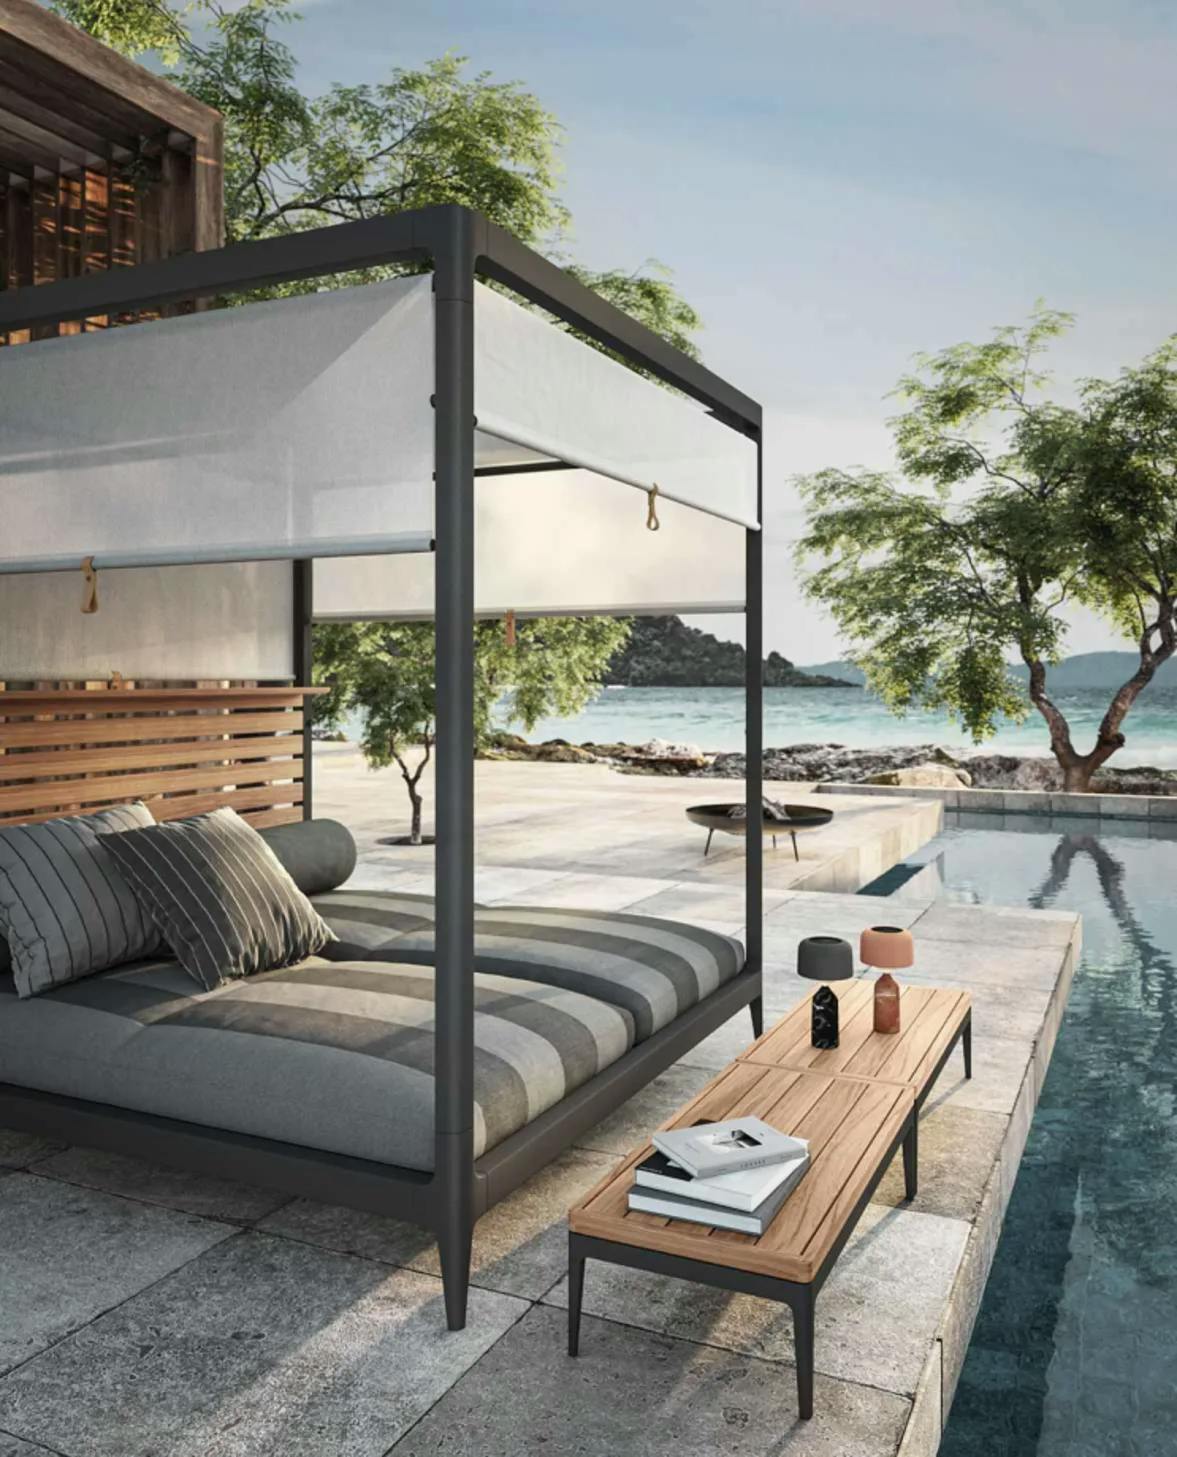 Gloster | Grid Cabana & Coffee Table (photo courtesy of Gloster)